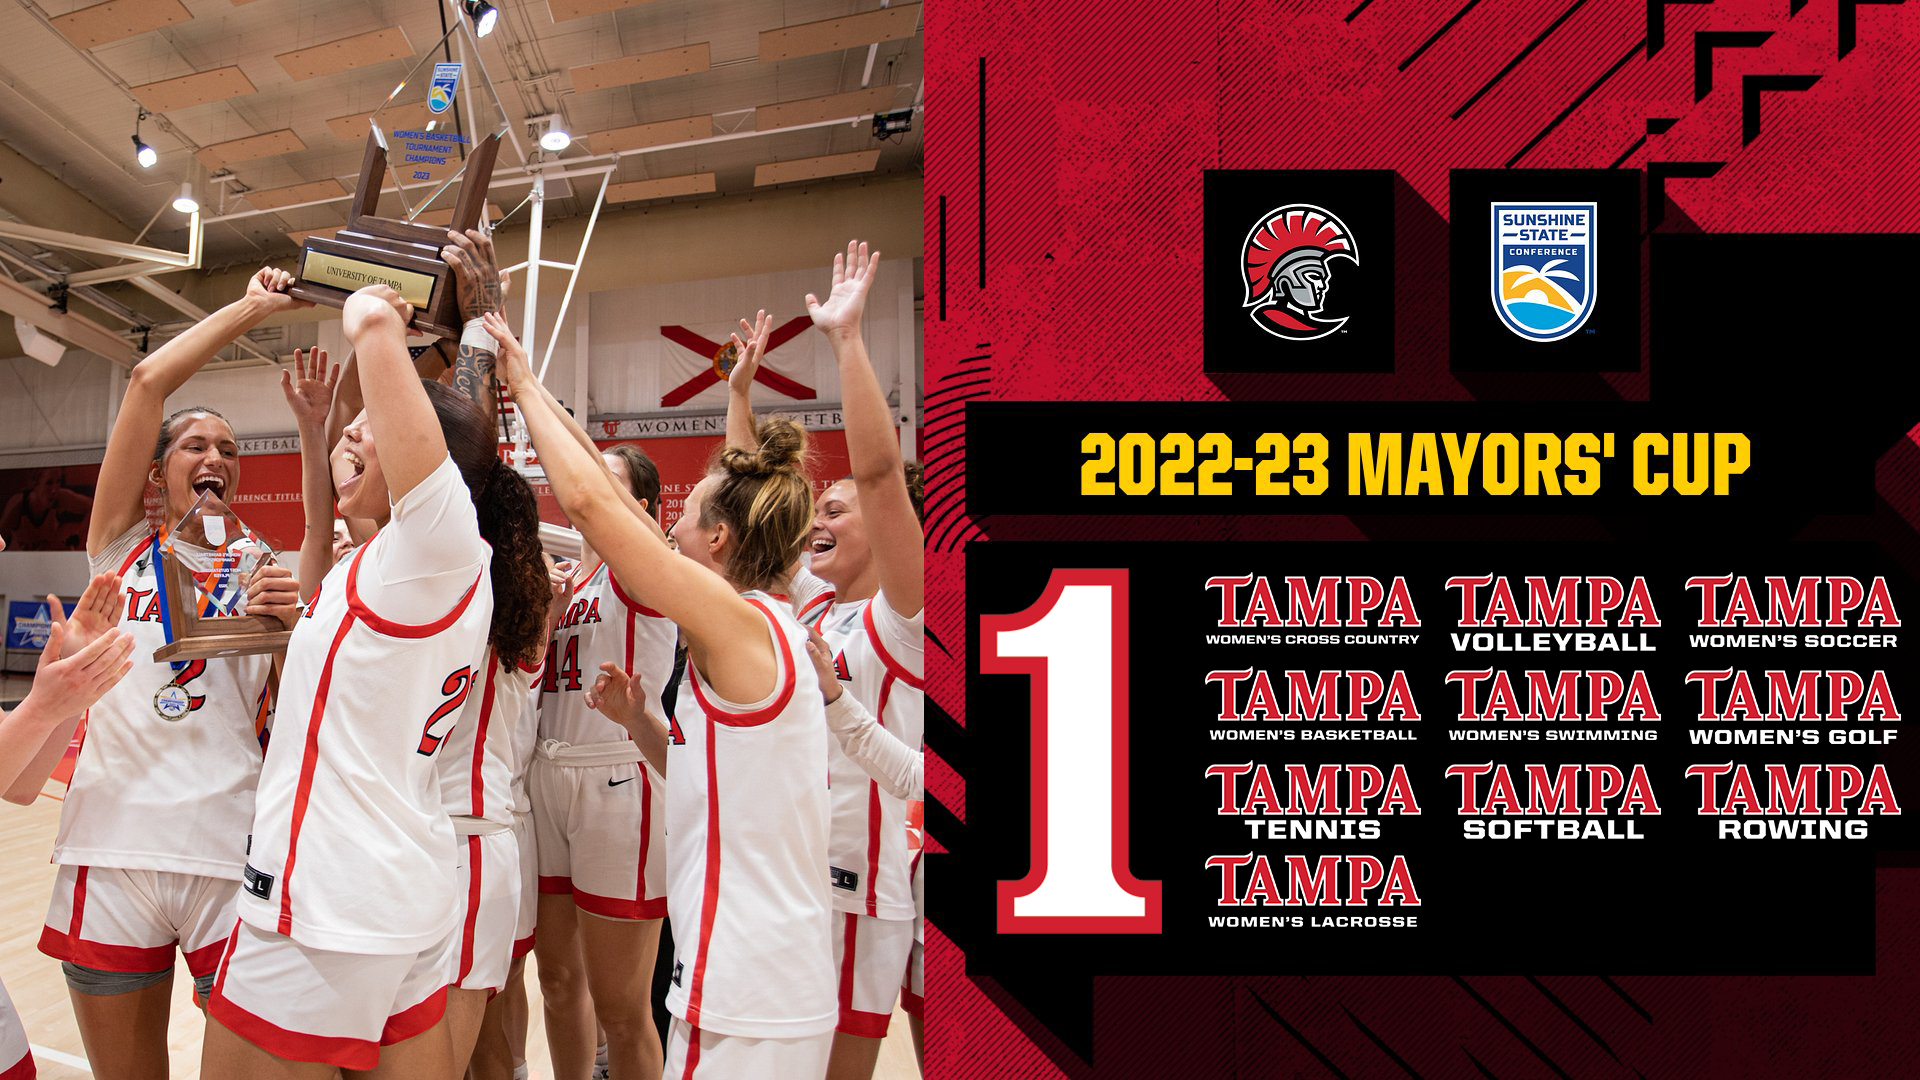 2022-23 SSC Women's Mayors' Cup